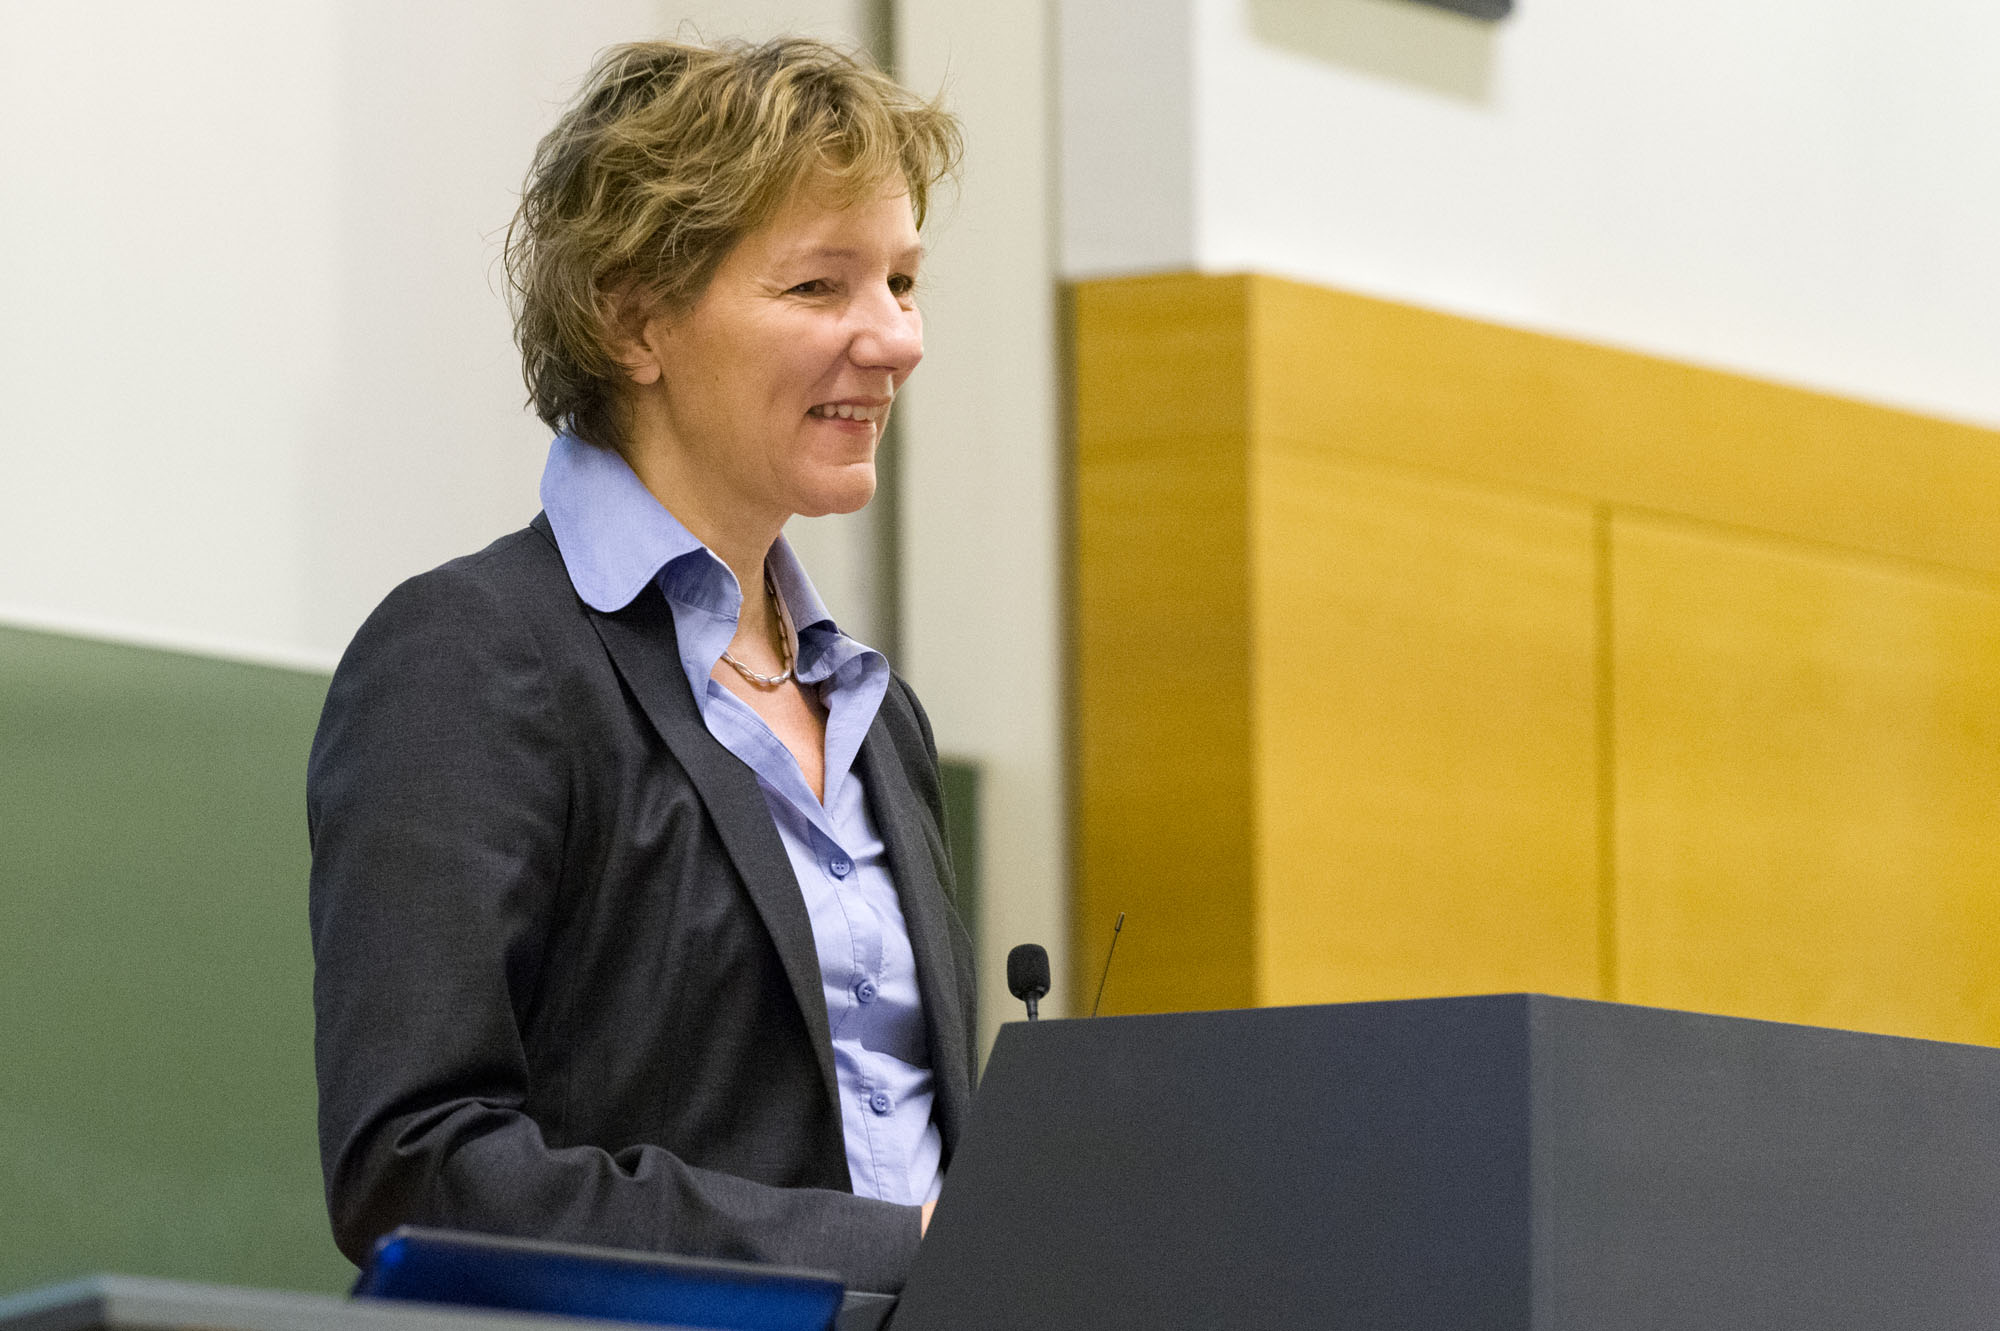 Prof. Angela Wienen giving a lecture